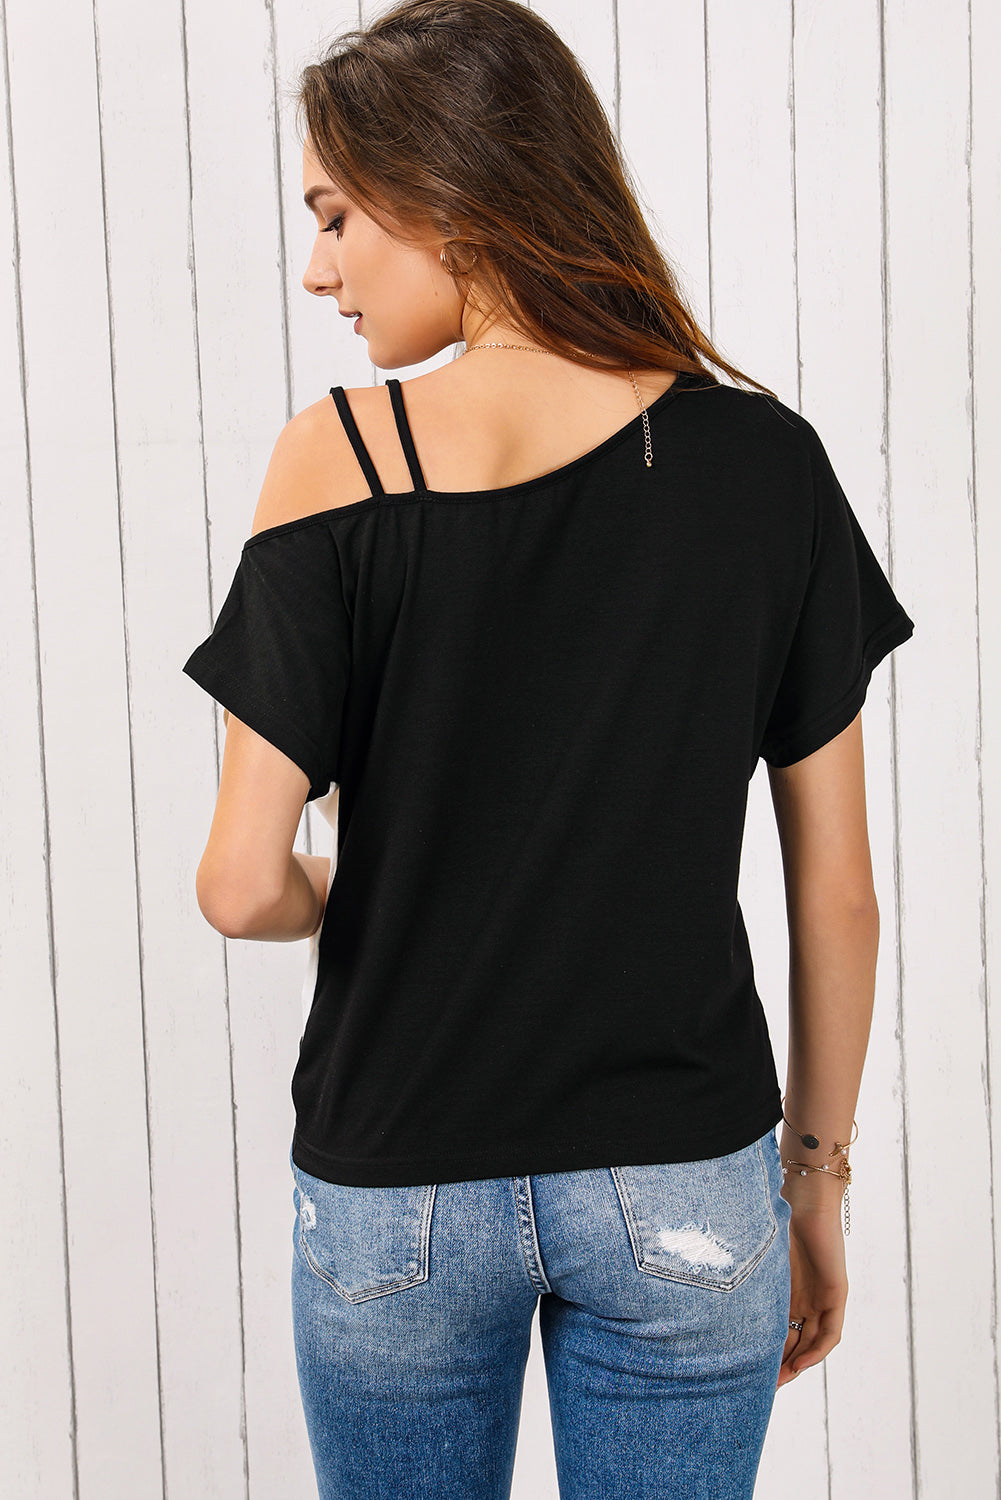 Contrast Twisted Asymmetrical Neck Top - Women’s Clothing & Accessories - Shirts & Tops - 2 - 2024